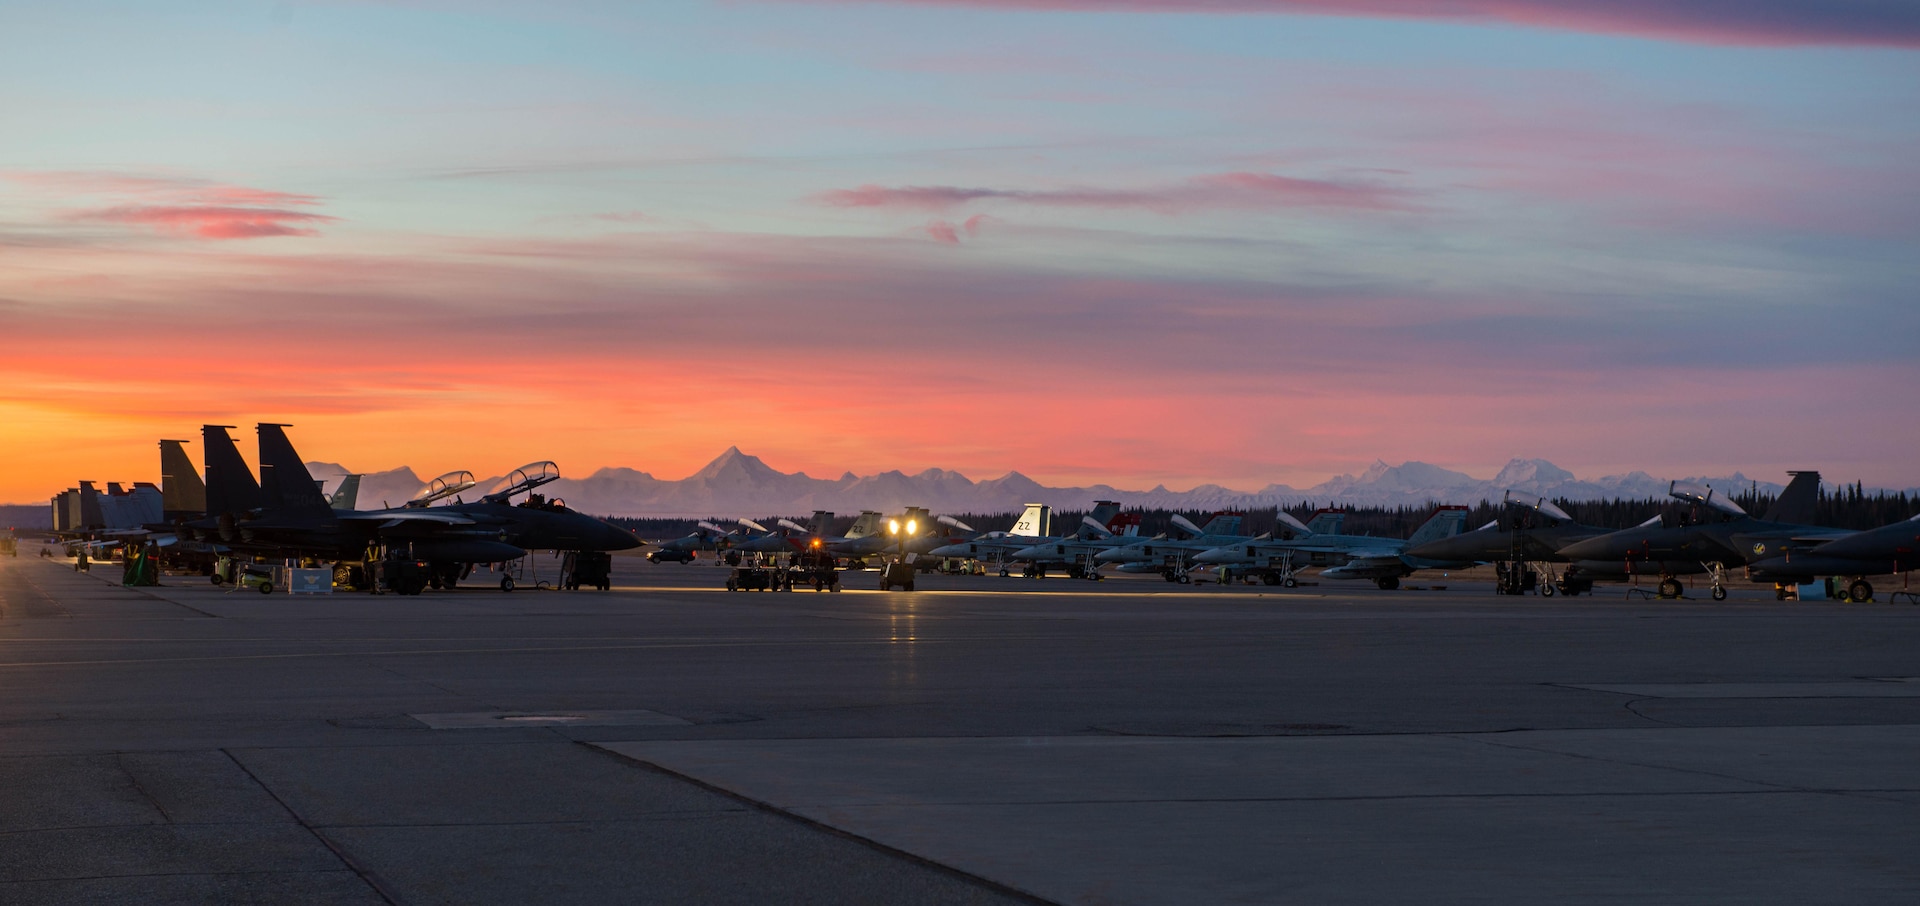 Republic of Korea F-15K Slam Eagle fighter aircraft and F-A18C Hornet fighter and attack jets from Marine Fighter Attack Squadron 232, Marine Corps Air Station Miramar, Calif., are prepared for a sortie Oct. 11, 2016, during RED FLAG-Alaska (RF-A) 17-1 at Eielson Air Force Base, Alaska. RF-A provides unique opportunities to integrate various forces into joint, coalition and multilateral training from simulated forward operating bases. (U.S. Air Force photo by Staff Sgt. Shawn Nickel)
